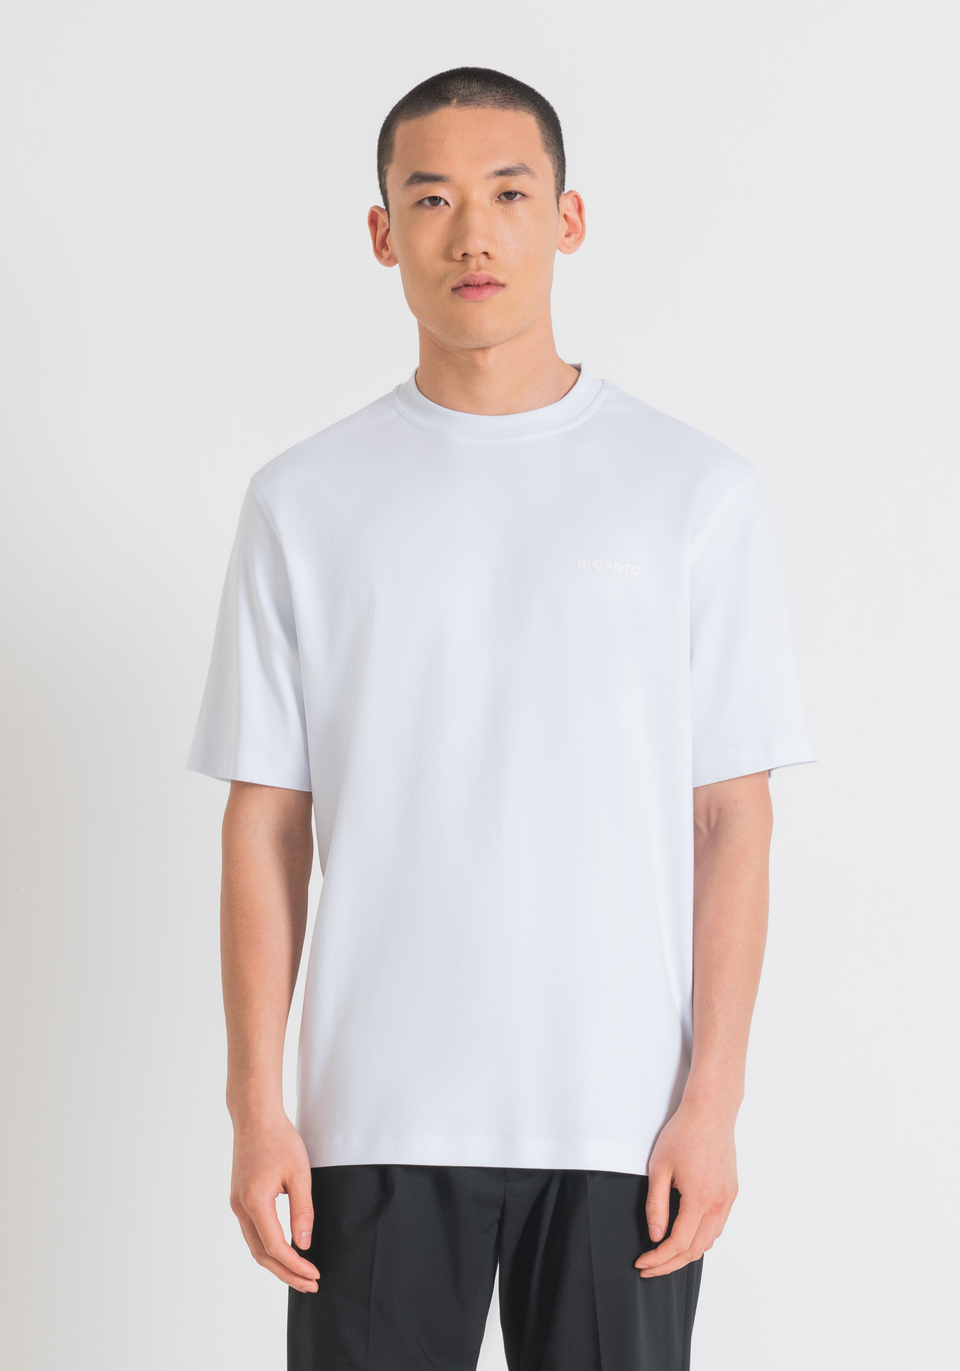 RELAXED FIT T-SHIRT IN COTTON JERSEY WITH RAISED MATTE LOGO PRINT - Antony Morato Online Shop